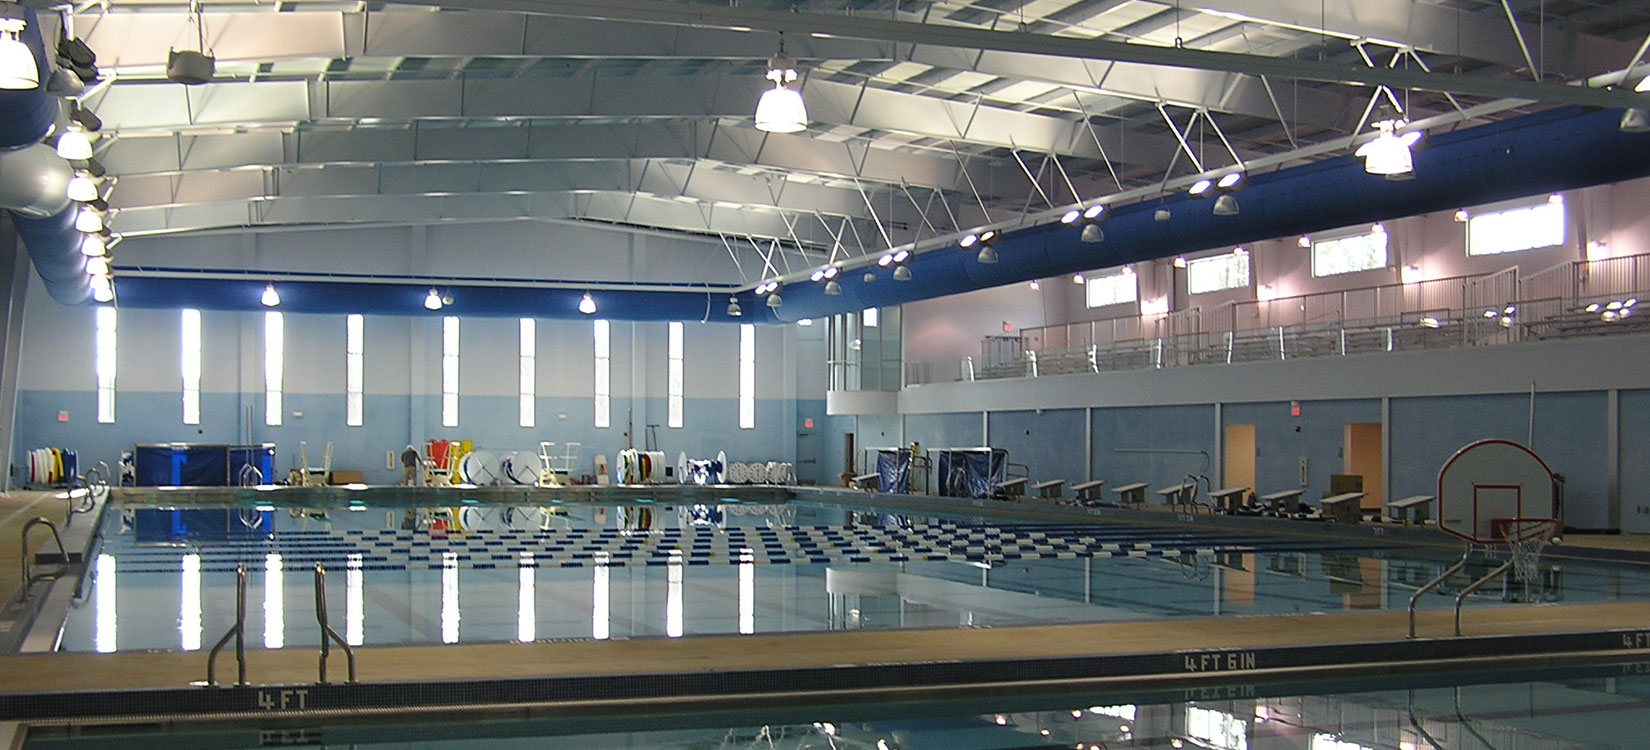 Image of Aquatic Center just outside of Atlanta GA, a pre-engineered metal building by Nucor Building Systems with a metal roofing system that was subcontracted to Fox Building Company for furnish and erect.